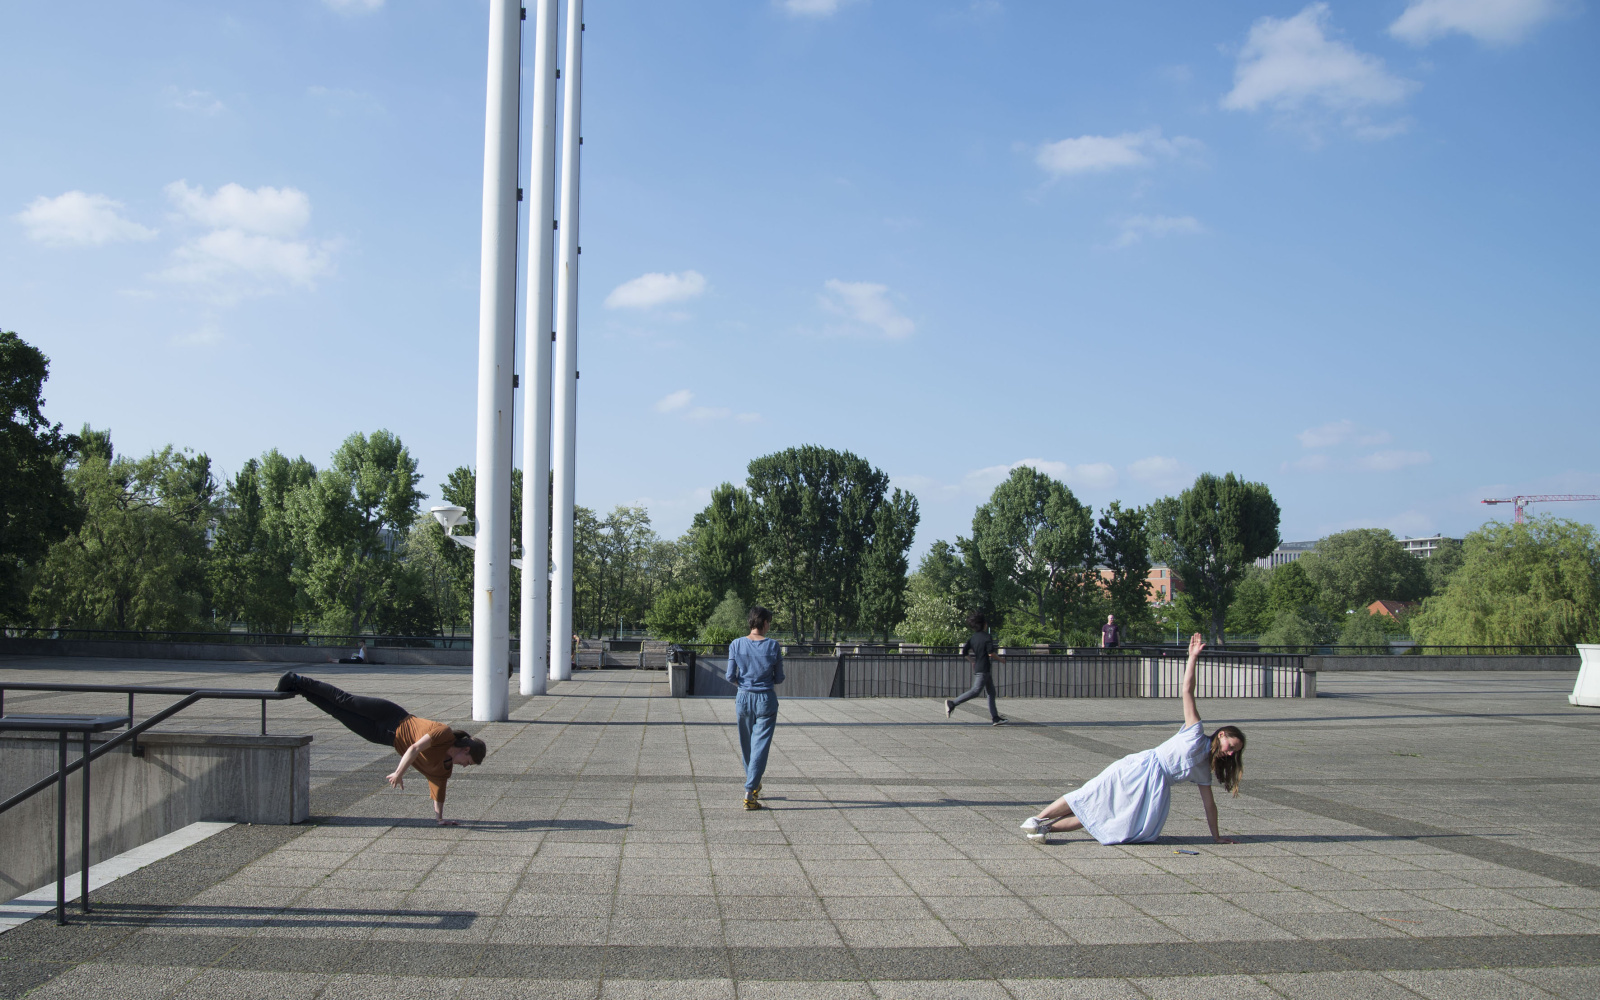 You can see a large, paved square in the open. In the background are some trees. In the picture 3 persons are standing far apart. The two people outside are doing a push-up, the person in the middle turns his back to the camera. 